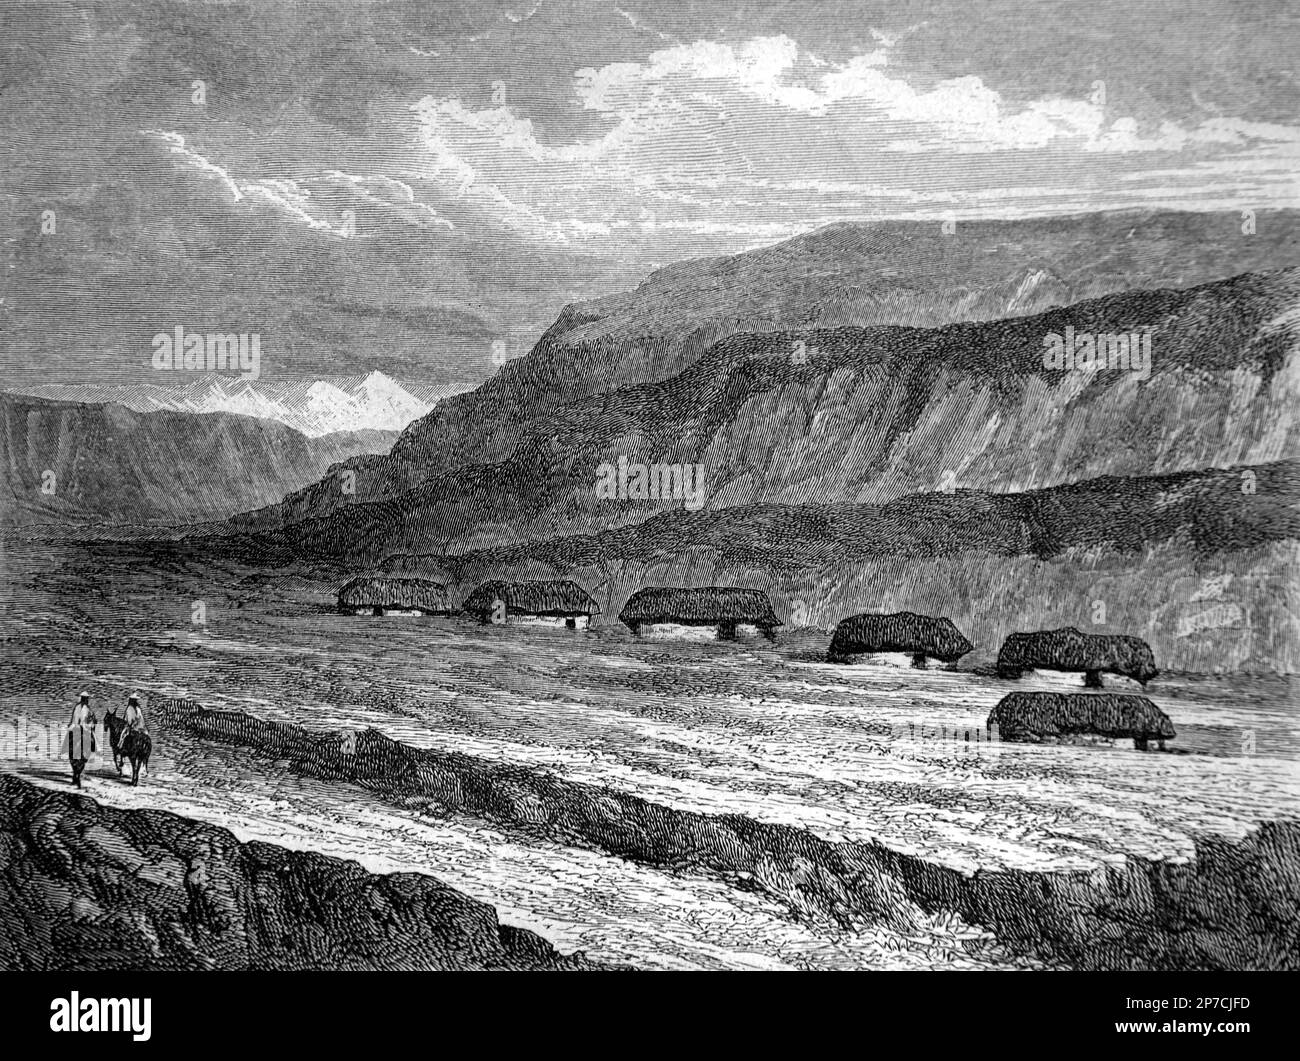 Quechua Houses, Native Huts or Dwellings in Village Along the Rio Compueria, Puno Region, Peru Vintage or Historical Engraving or Illustration 1862 Stock Photo